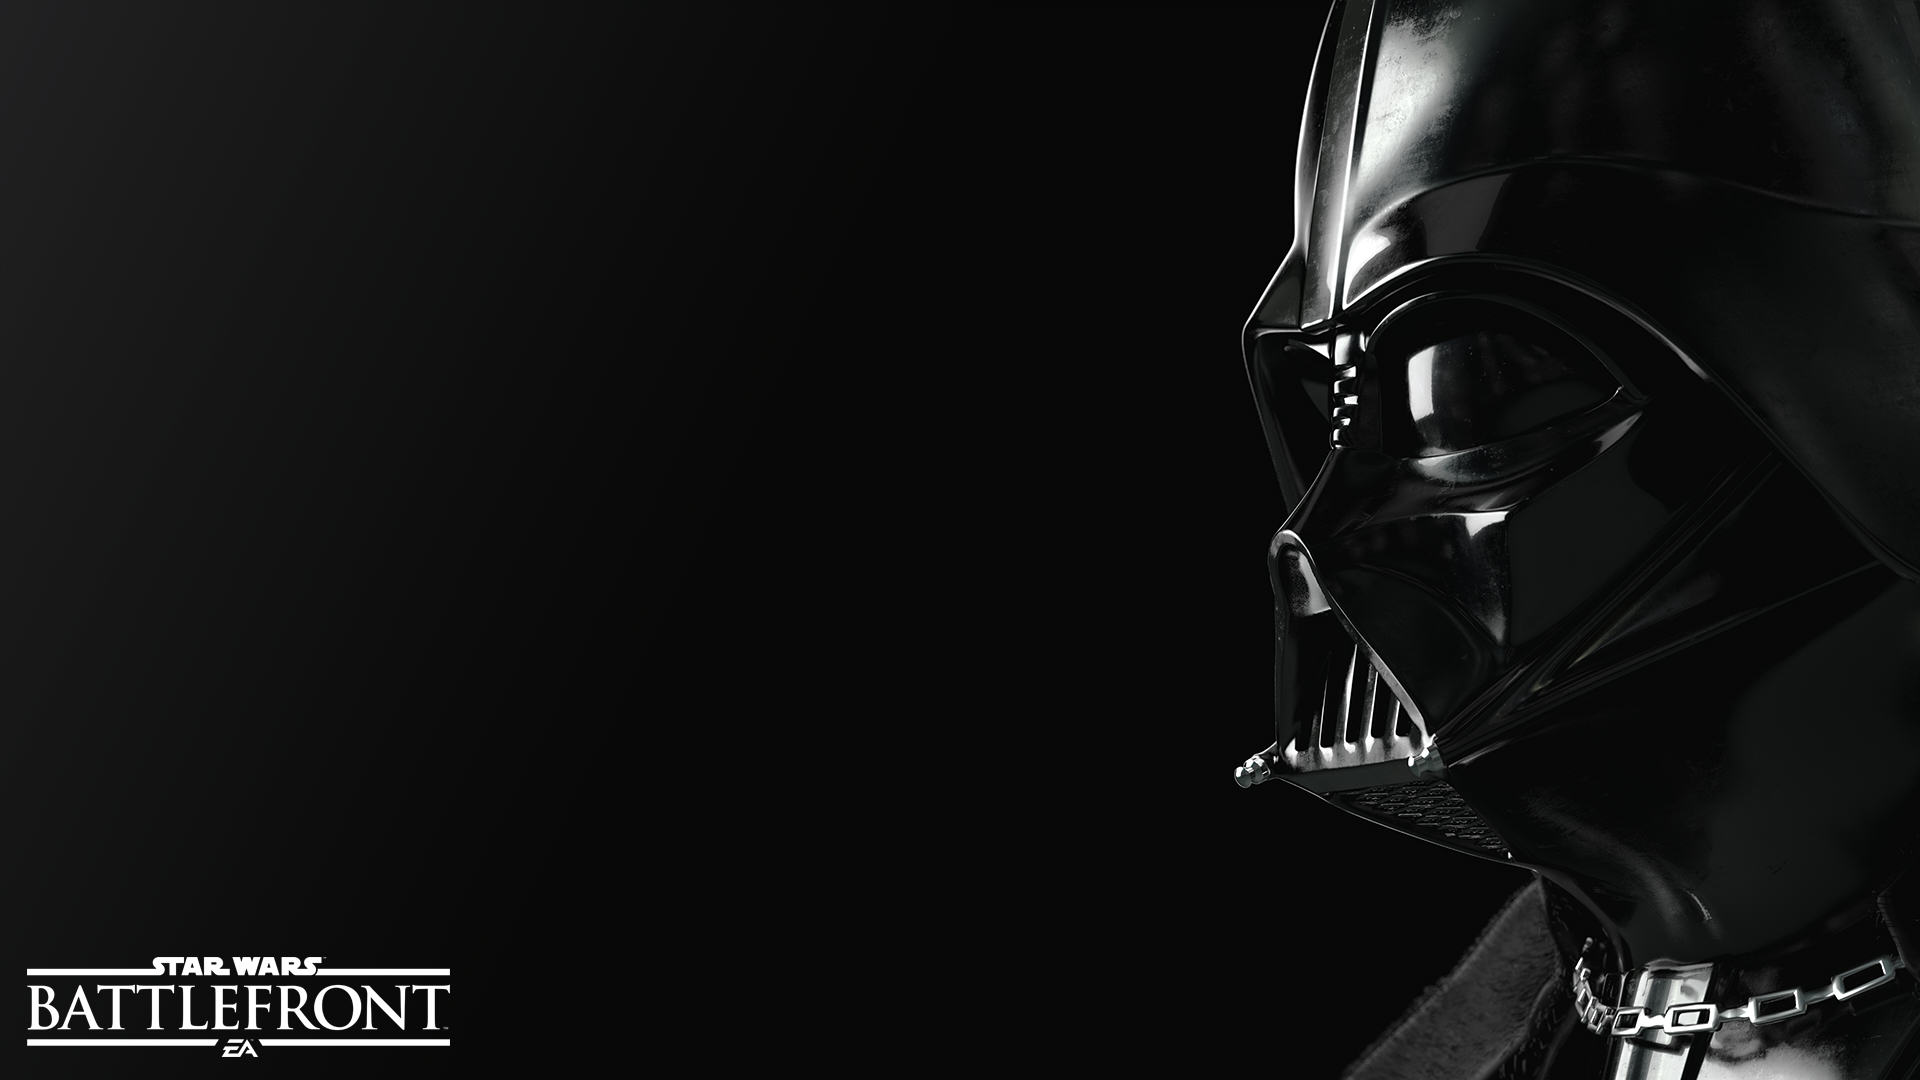 Star Wars Battlefront Looks Stunning In These Desktop Background And